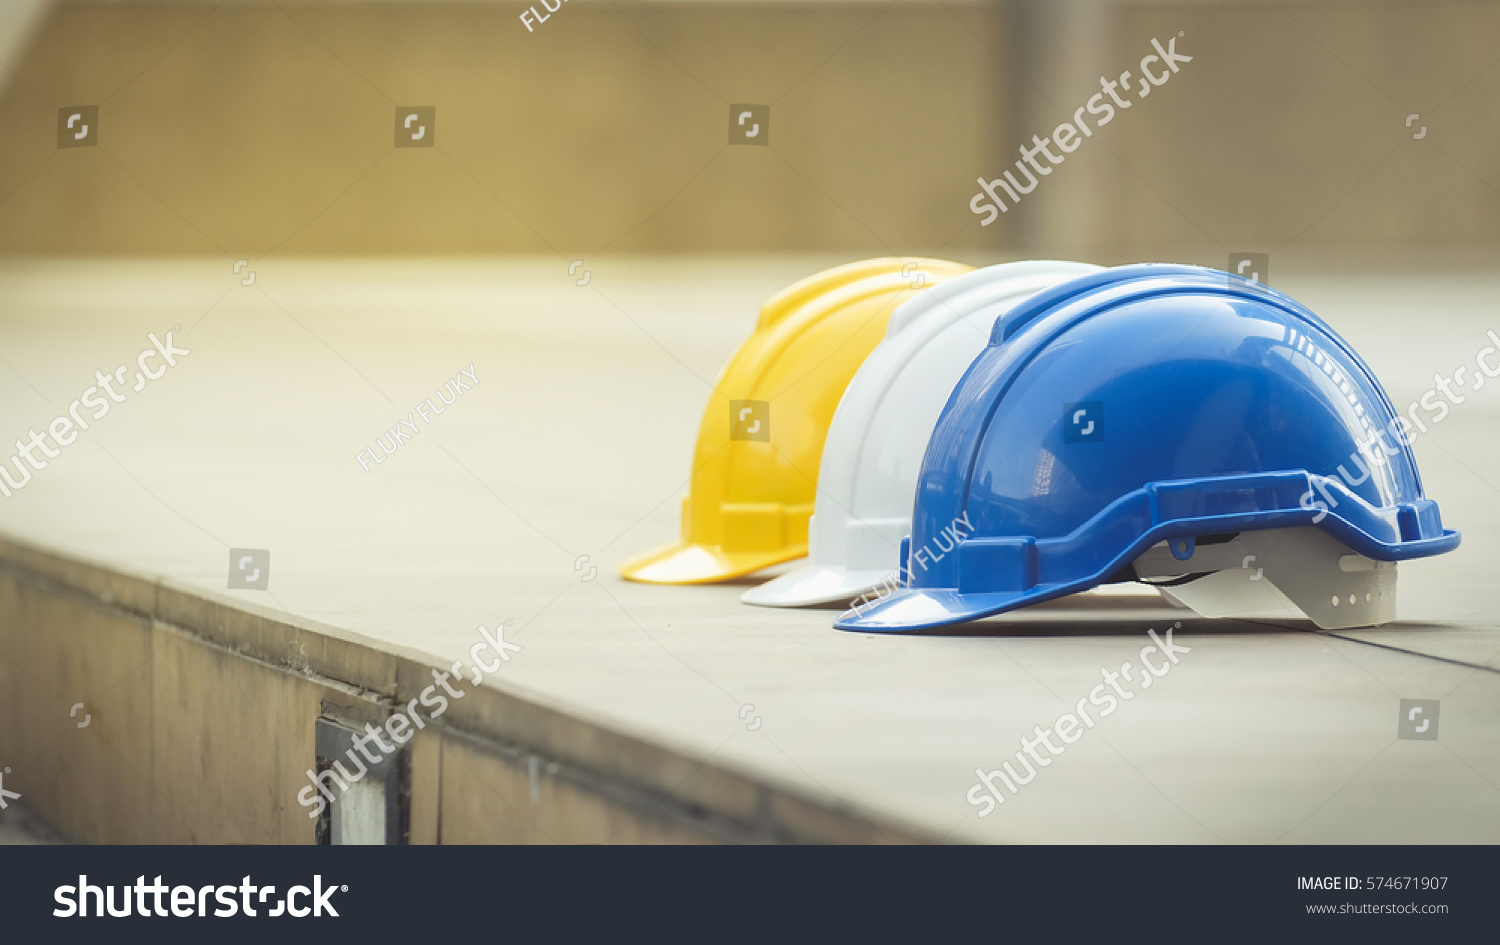 white, yellow and blue hard safety helmet hat for safety project of workman as engineer or worker, on concrete floor on city #574671907